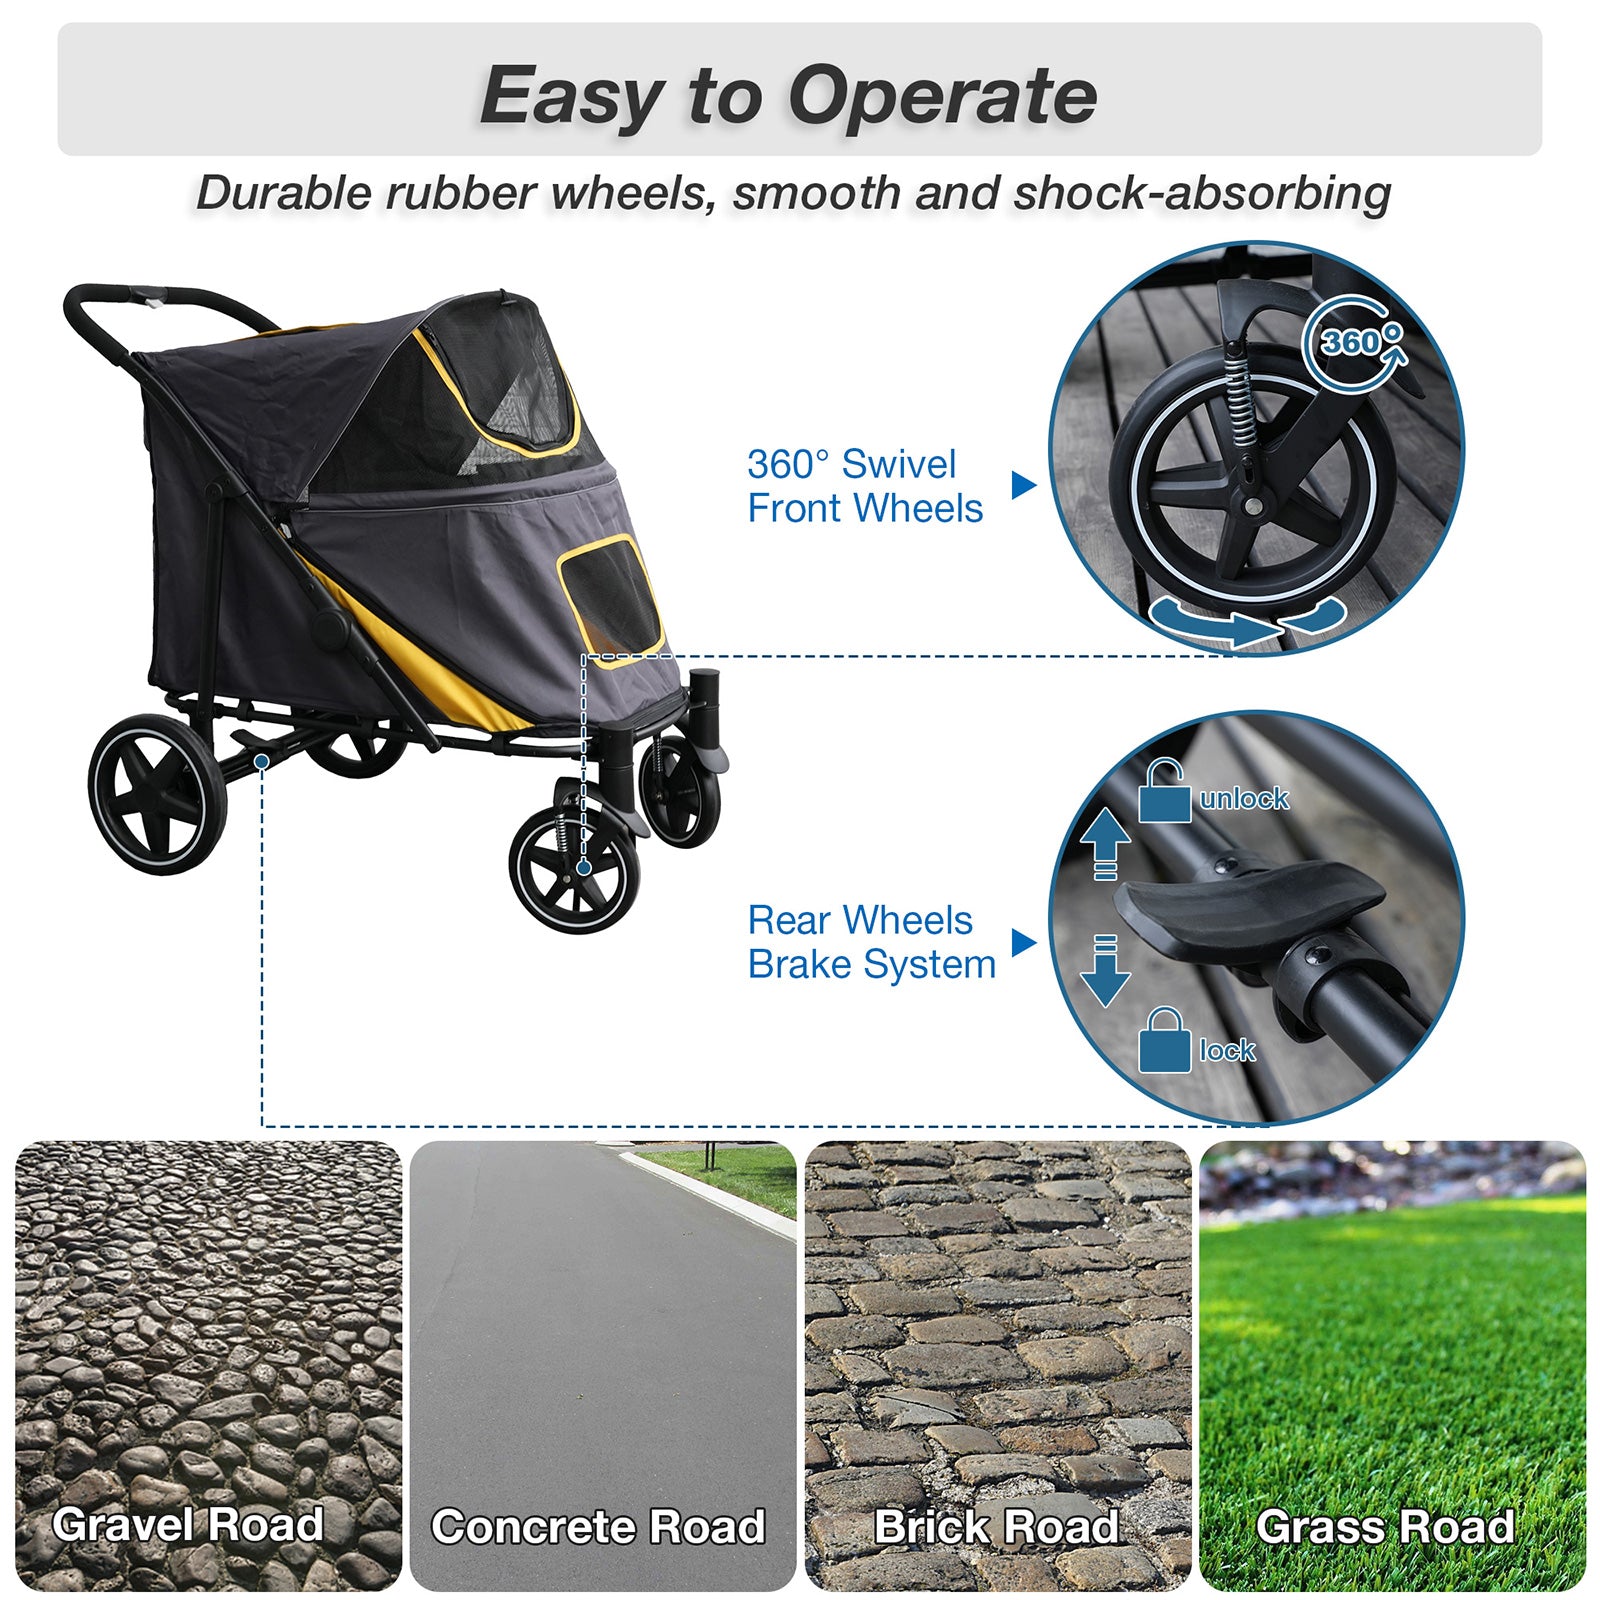 Foldable Pet Stroller Travel Carrier with Storage Pocket, Breathable Mesh, Gray and Yellow